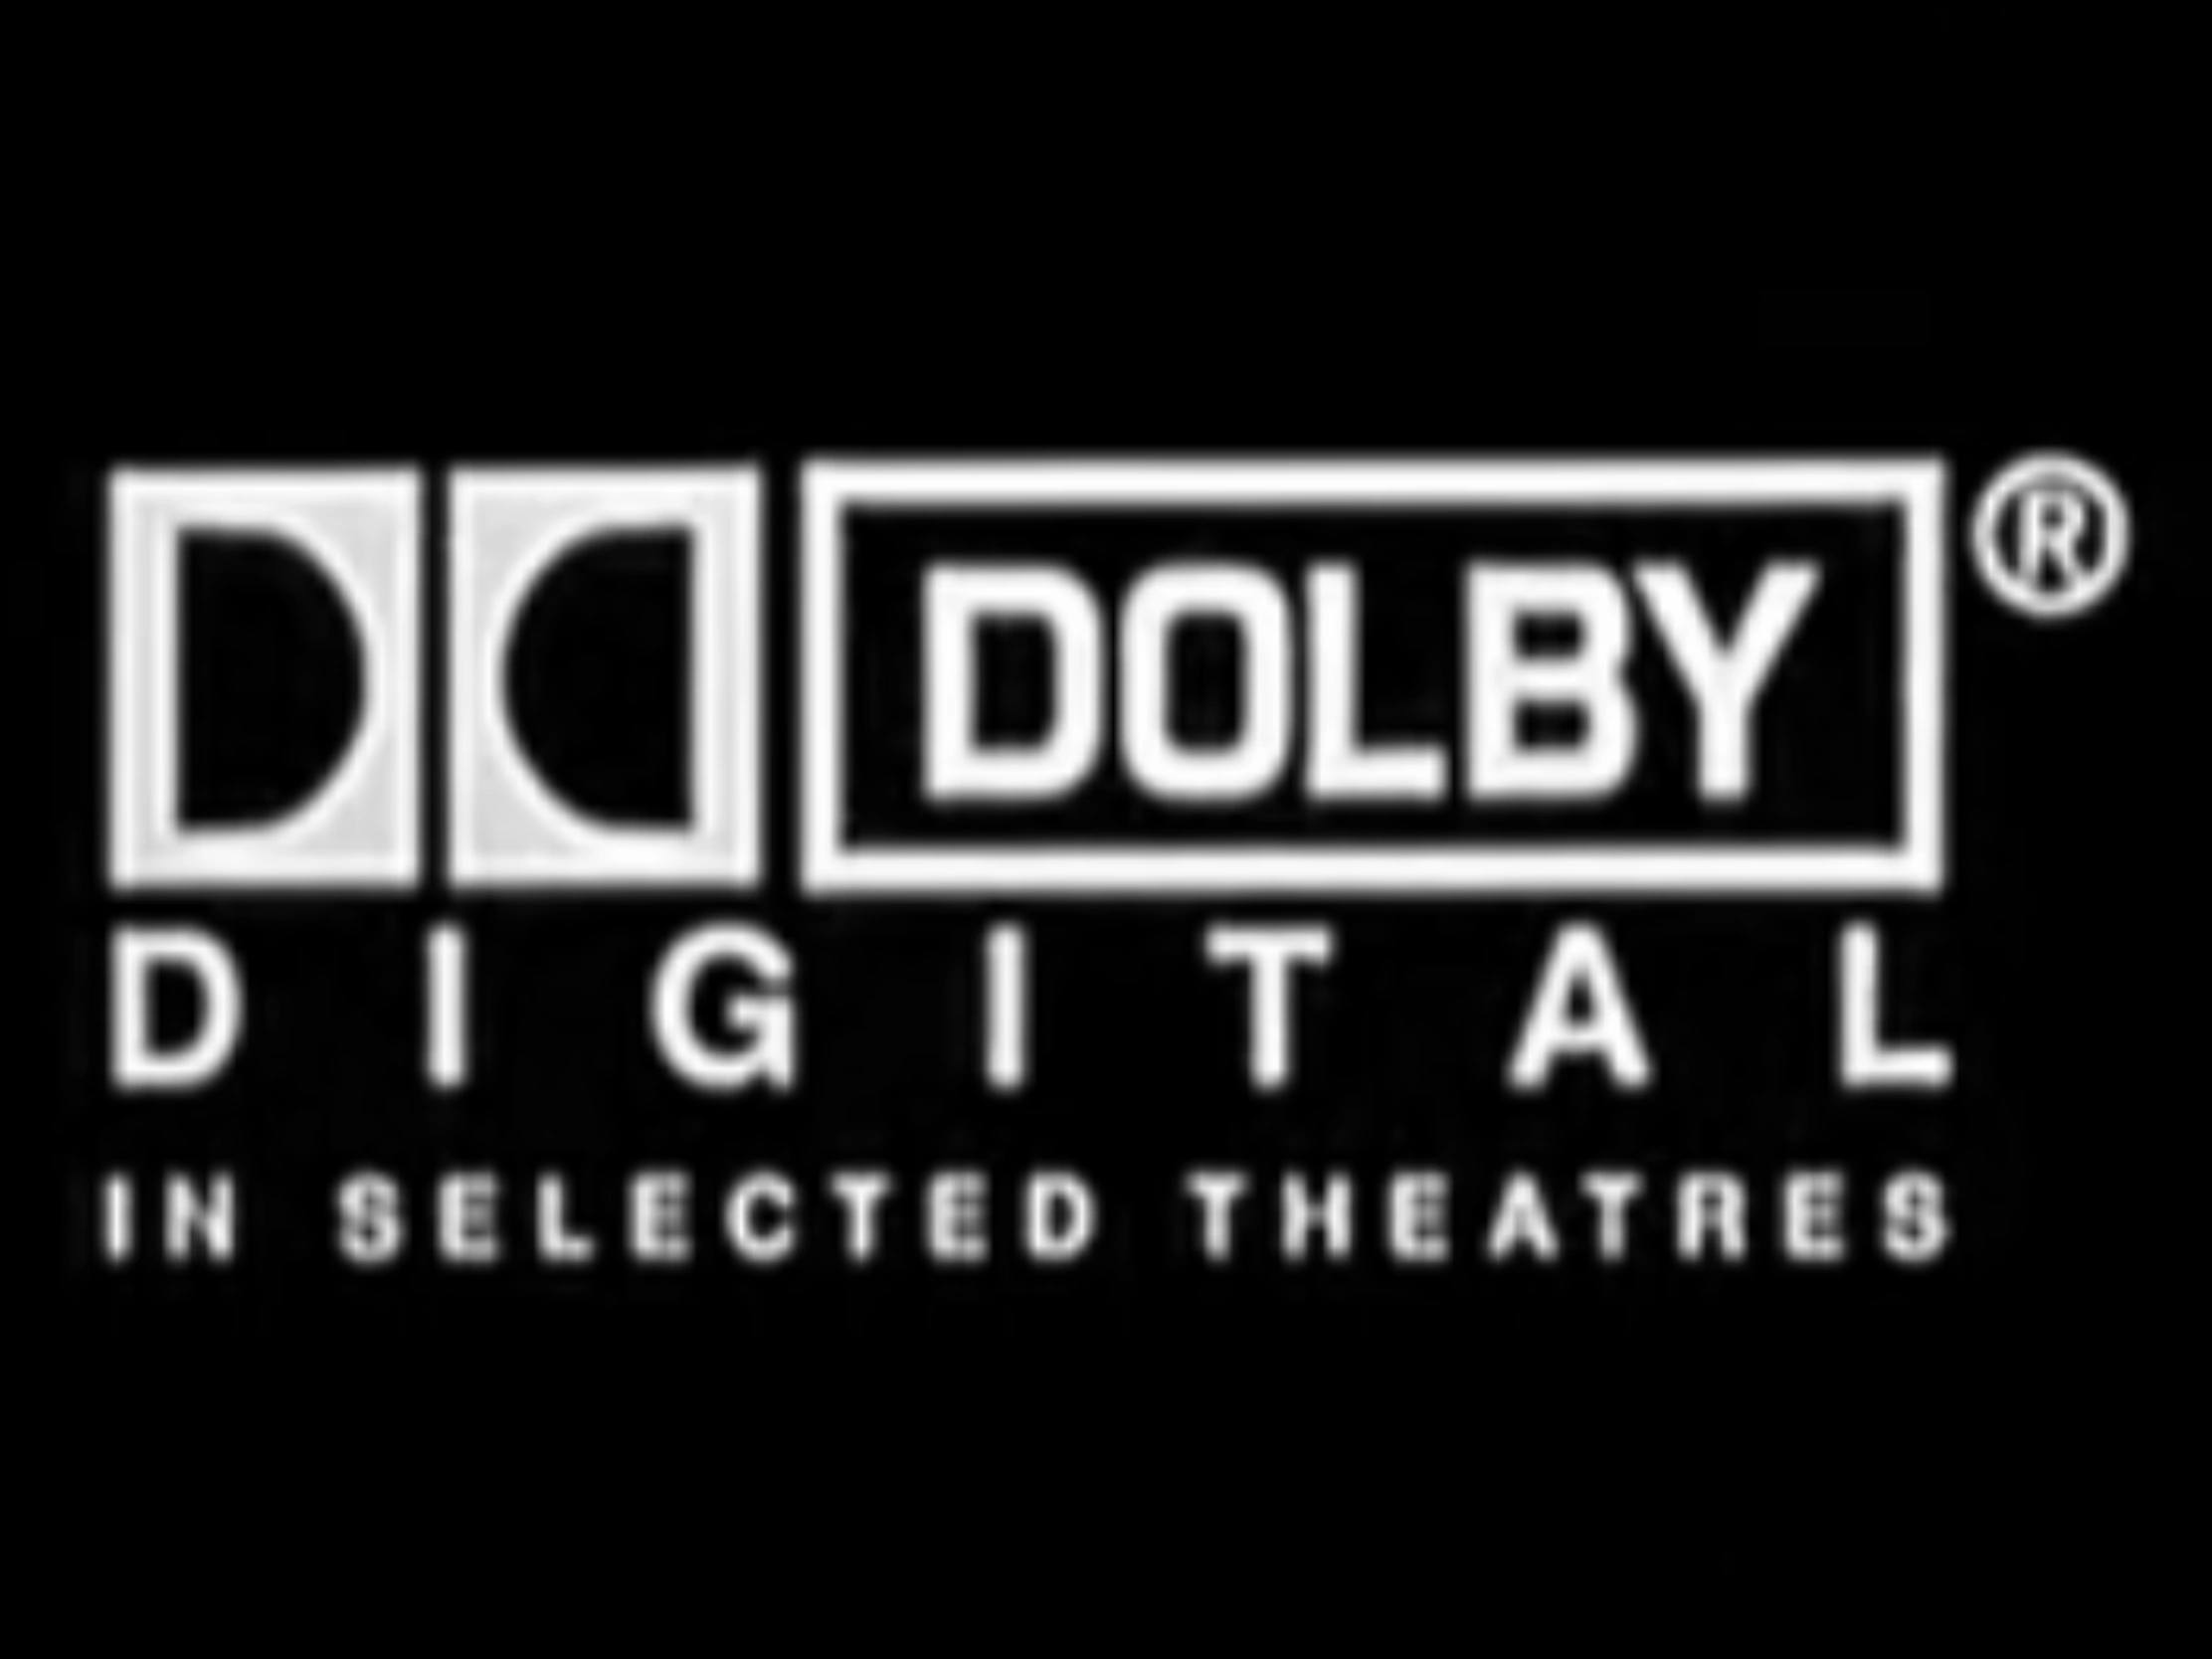 dolby digital surround ex in selected theatres logo